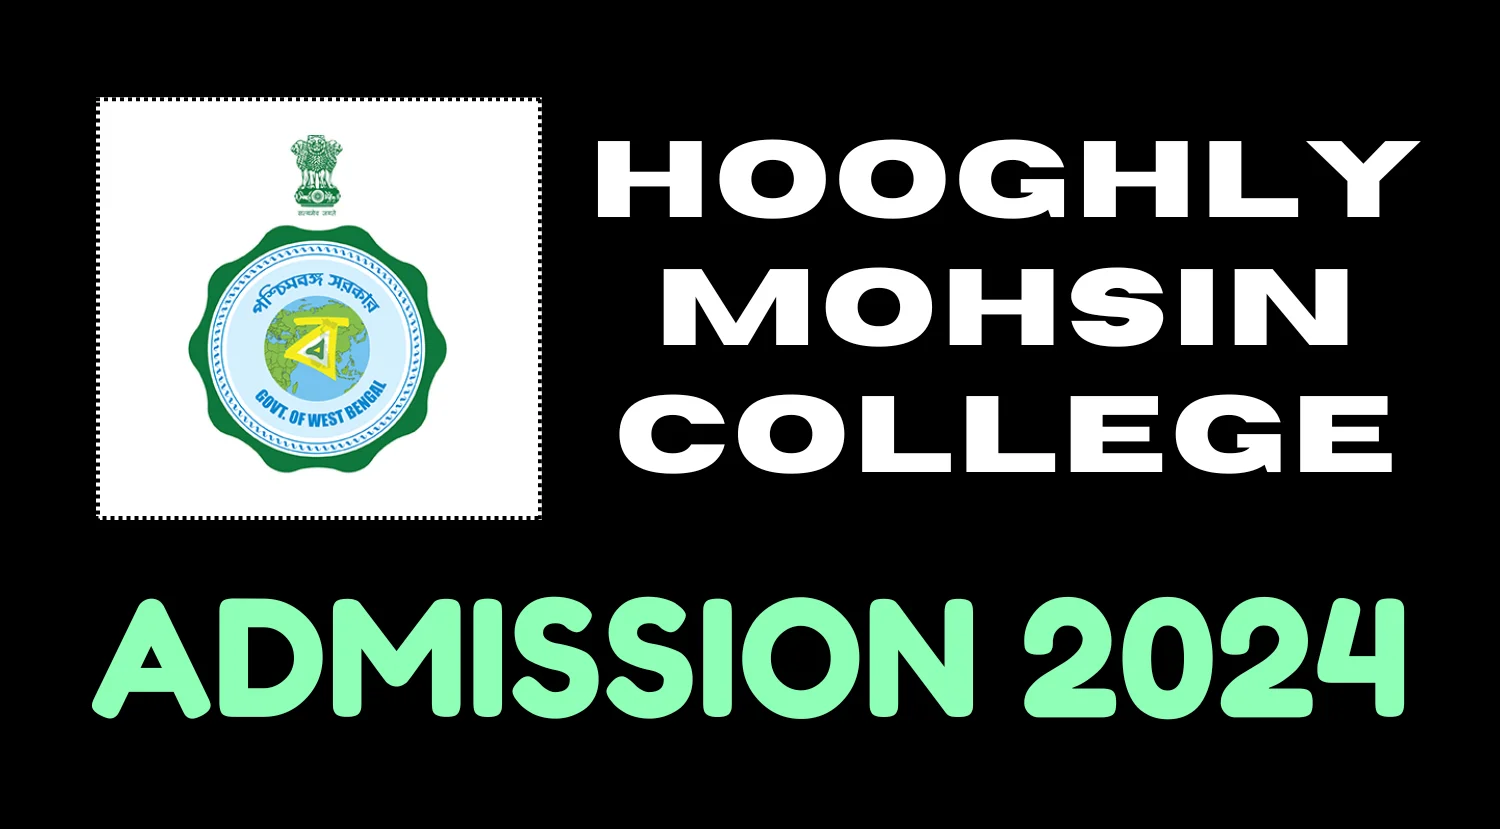 Hooghly Mohsin College Admission 2024, Check HMC Admisssion Eligibility, Merit List Here